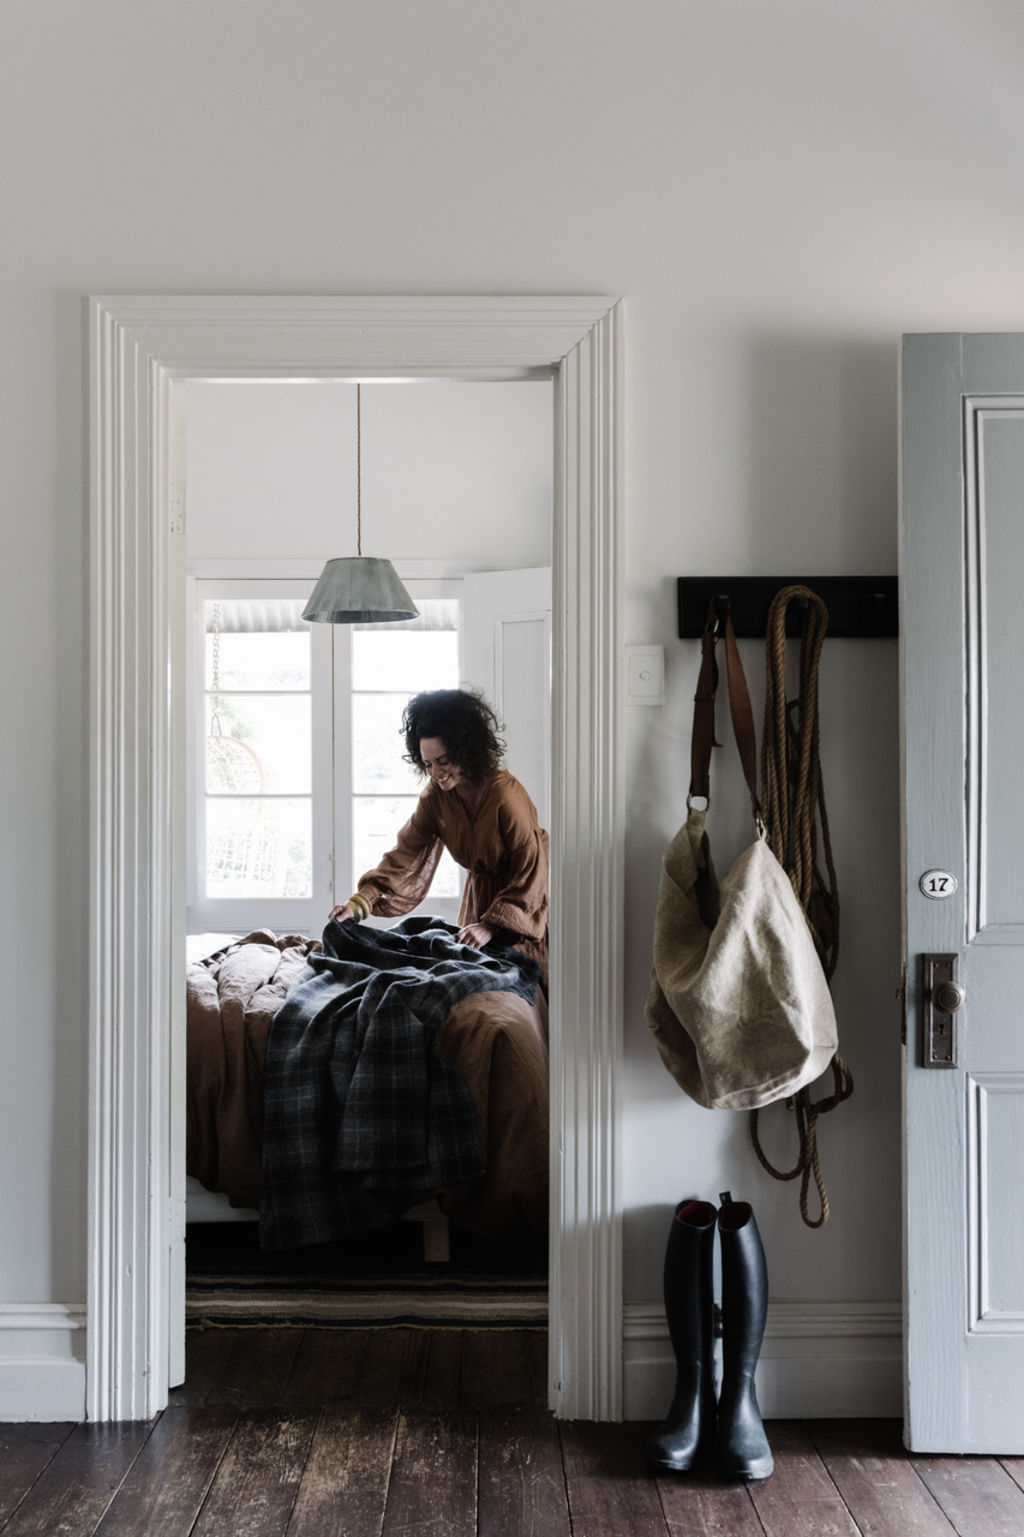 Designer Lynda Gardener uses white in all of her home projects. Photo: Lean Timms